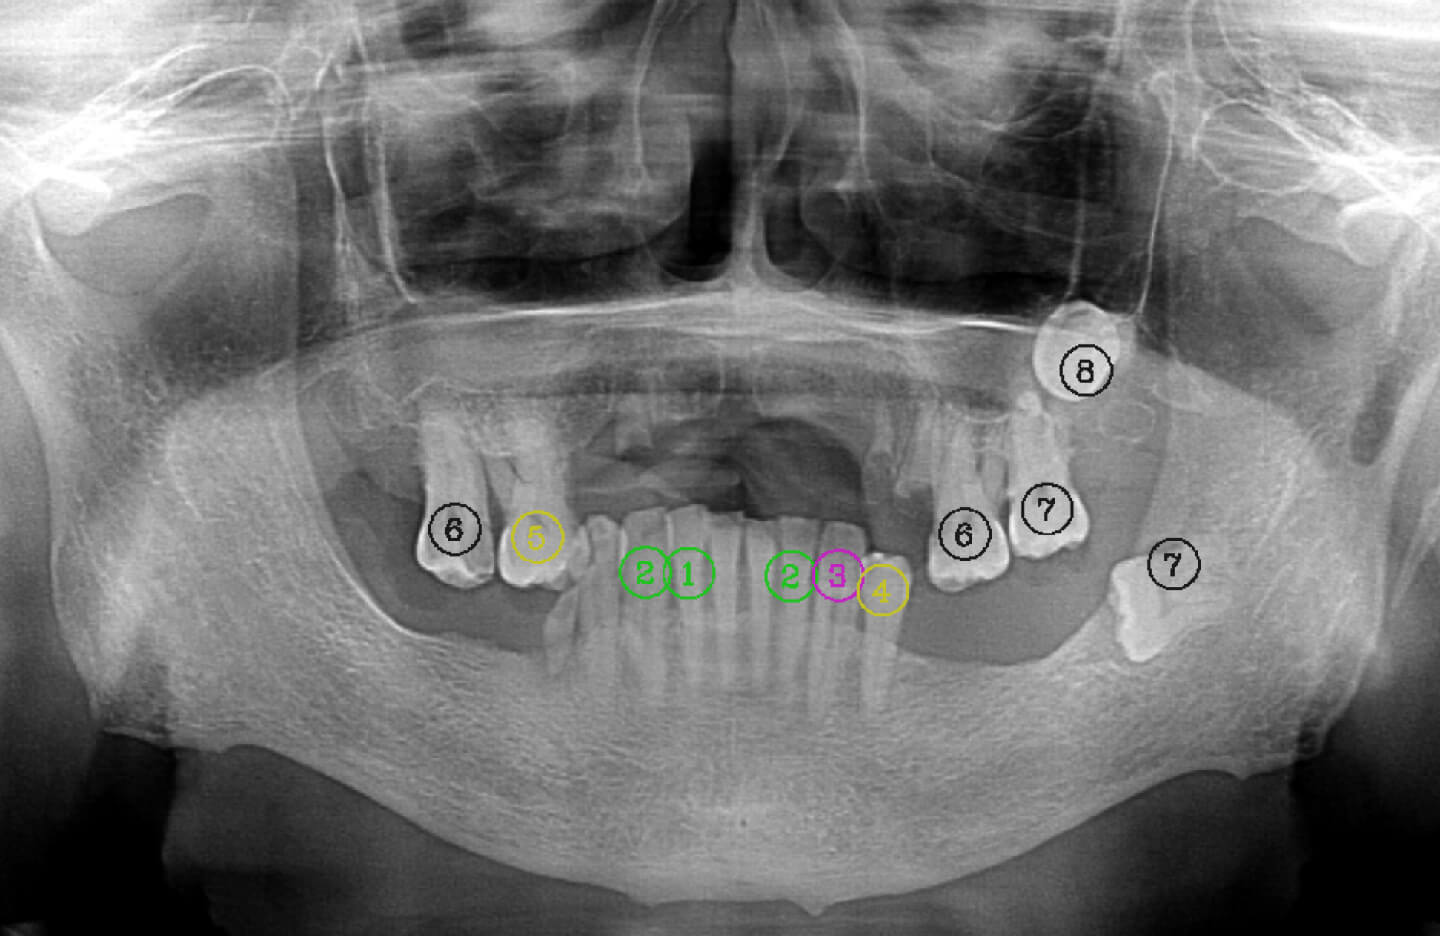 Computer vision AI used to detect teeth in xrays